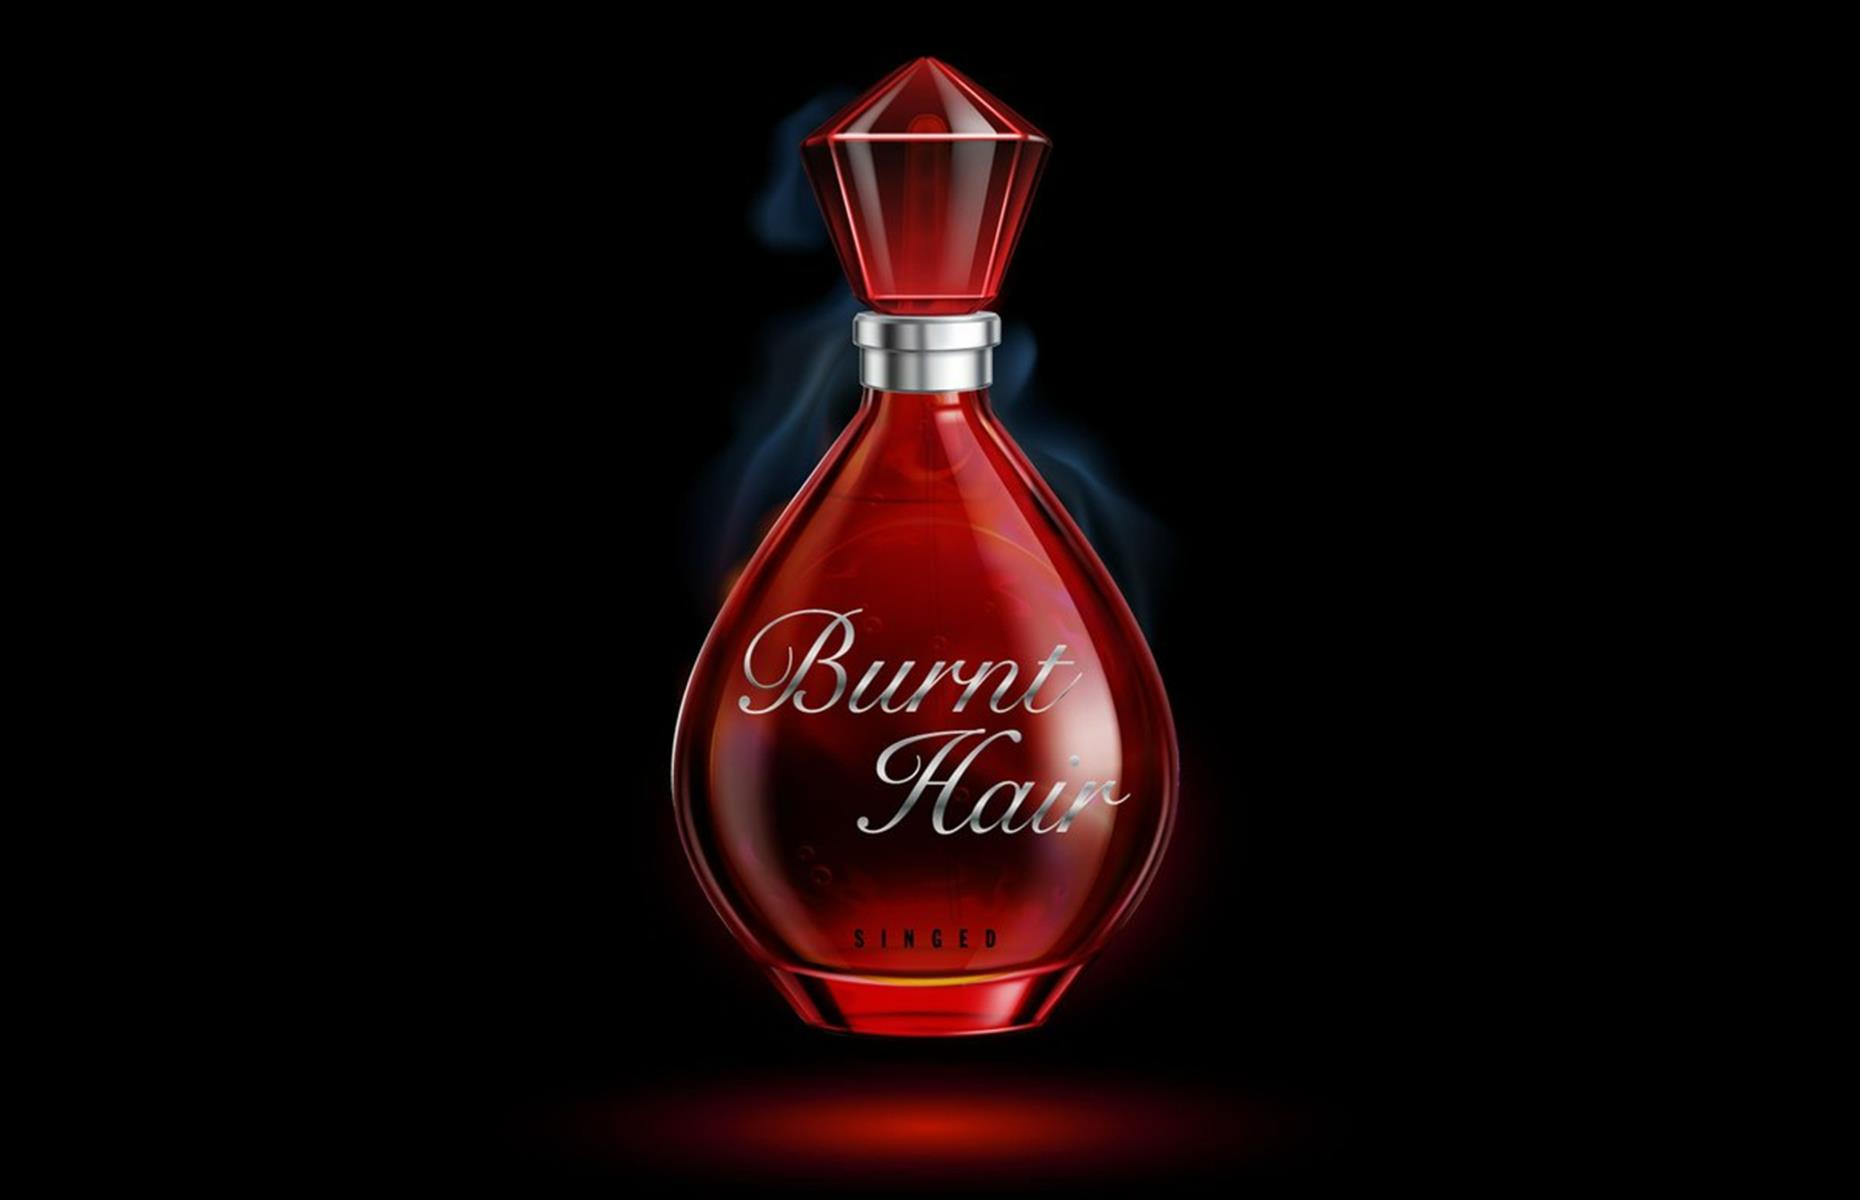 <p>With a name like his, it was only going to be a matter of time before Musk released his own fragrance.</p>  <p>Less expected, though, was the bad-boy billionaire's choice to name his debut scent Burnt Hair – and the decision to give it precisely that scent. </p>  <p>In typical Musk fashion, he took to Twitter to announce the launch of the product in October 2022, describing Burnt Hair as the "finest fragrance on Earth." The fragrance is also summed up as "the essence of repugnant desire" (who could resist?) on The Boring Company's website. </p>  <p>As well as having a scent that might raise eyebrows, the price tag is somewhat eye-watering, with bottles selling for $100. The first batch of the perfume completely sold out, reportedly making Musk more than $1 million in just a few hours. </p>  <p>But don't worry if you missed out on your chance to bag a bottle for yourself. The Boring Company seems to be hinting that a new fragrance, Flames, could be on its way in 2023...</p>